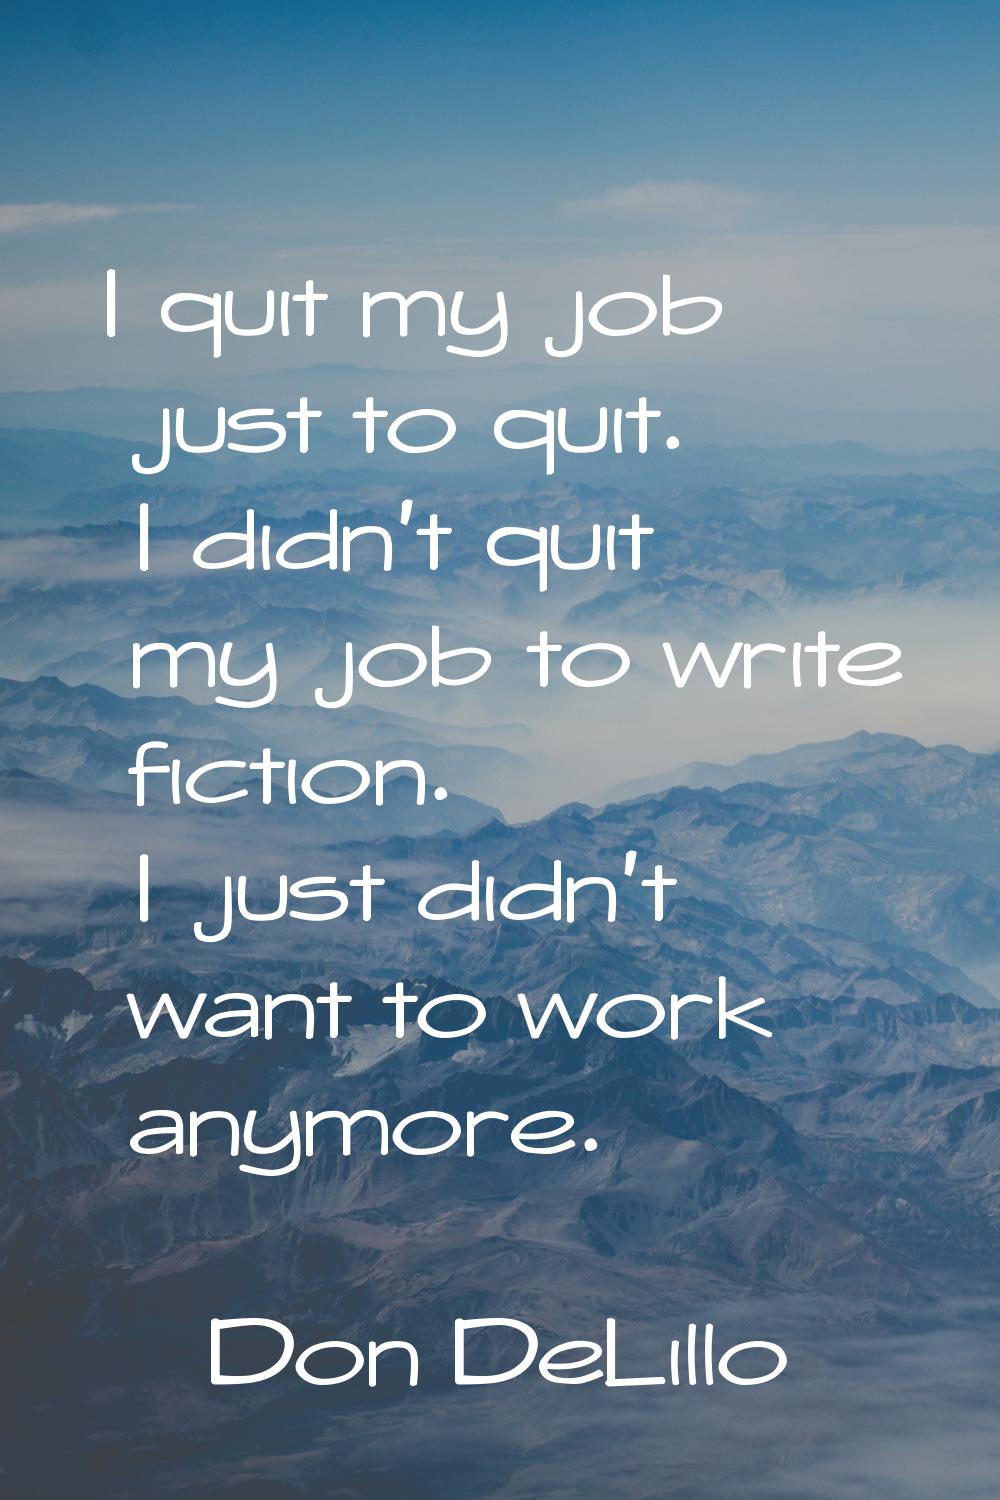 I quit my job just to quit. I didn't quit my job to write fiction. I just didn't want to work anymo